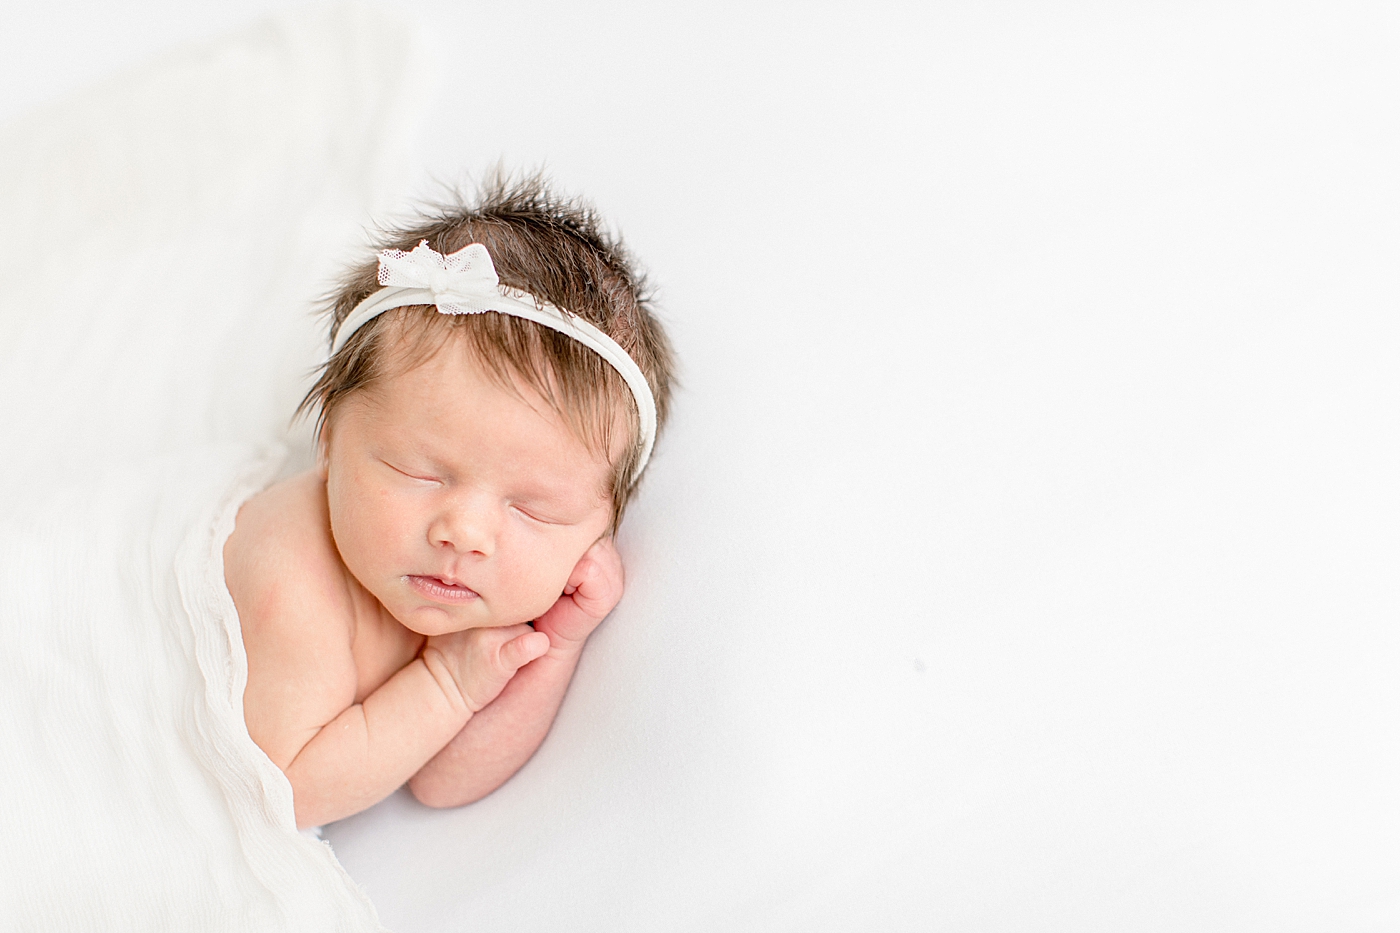 Baby girl newborn session in studio in Tampa, Fl. Photo by Brittany Elise Photography.